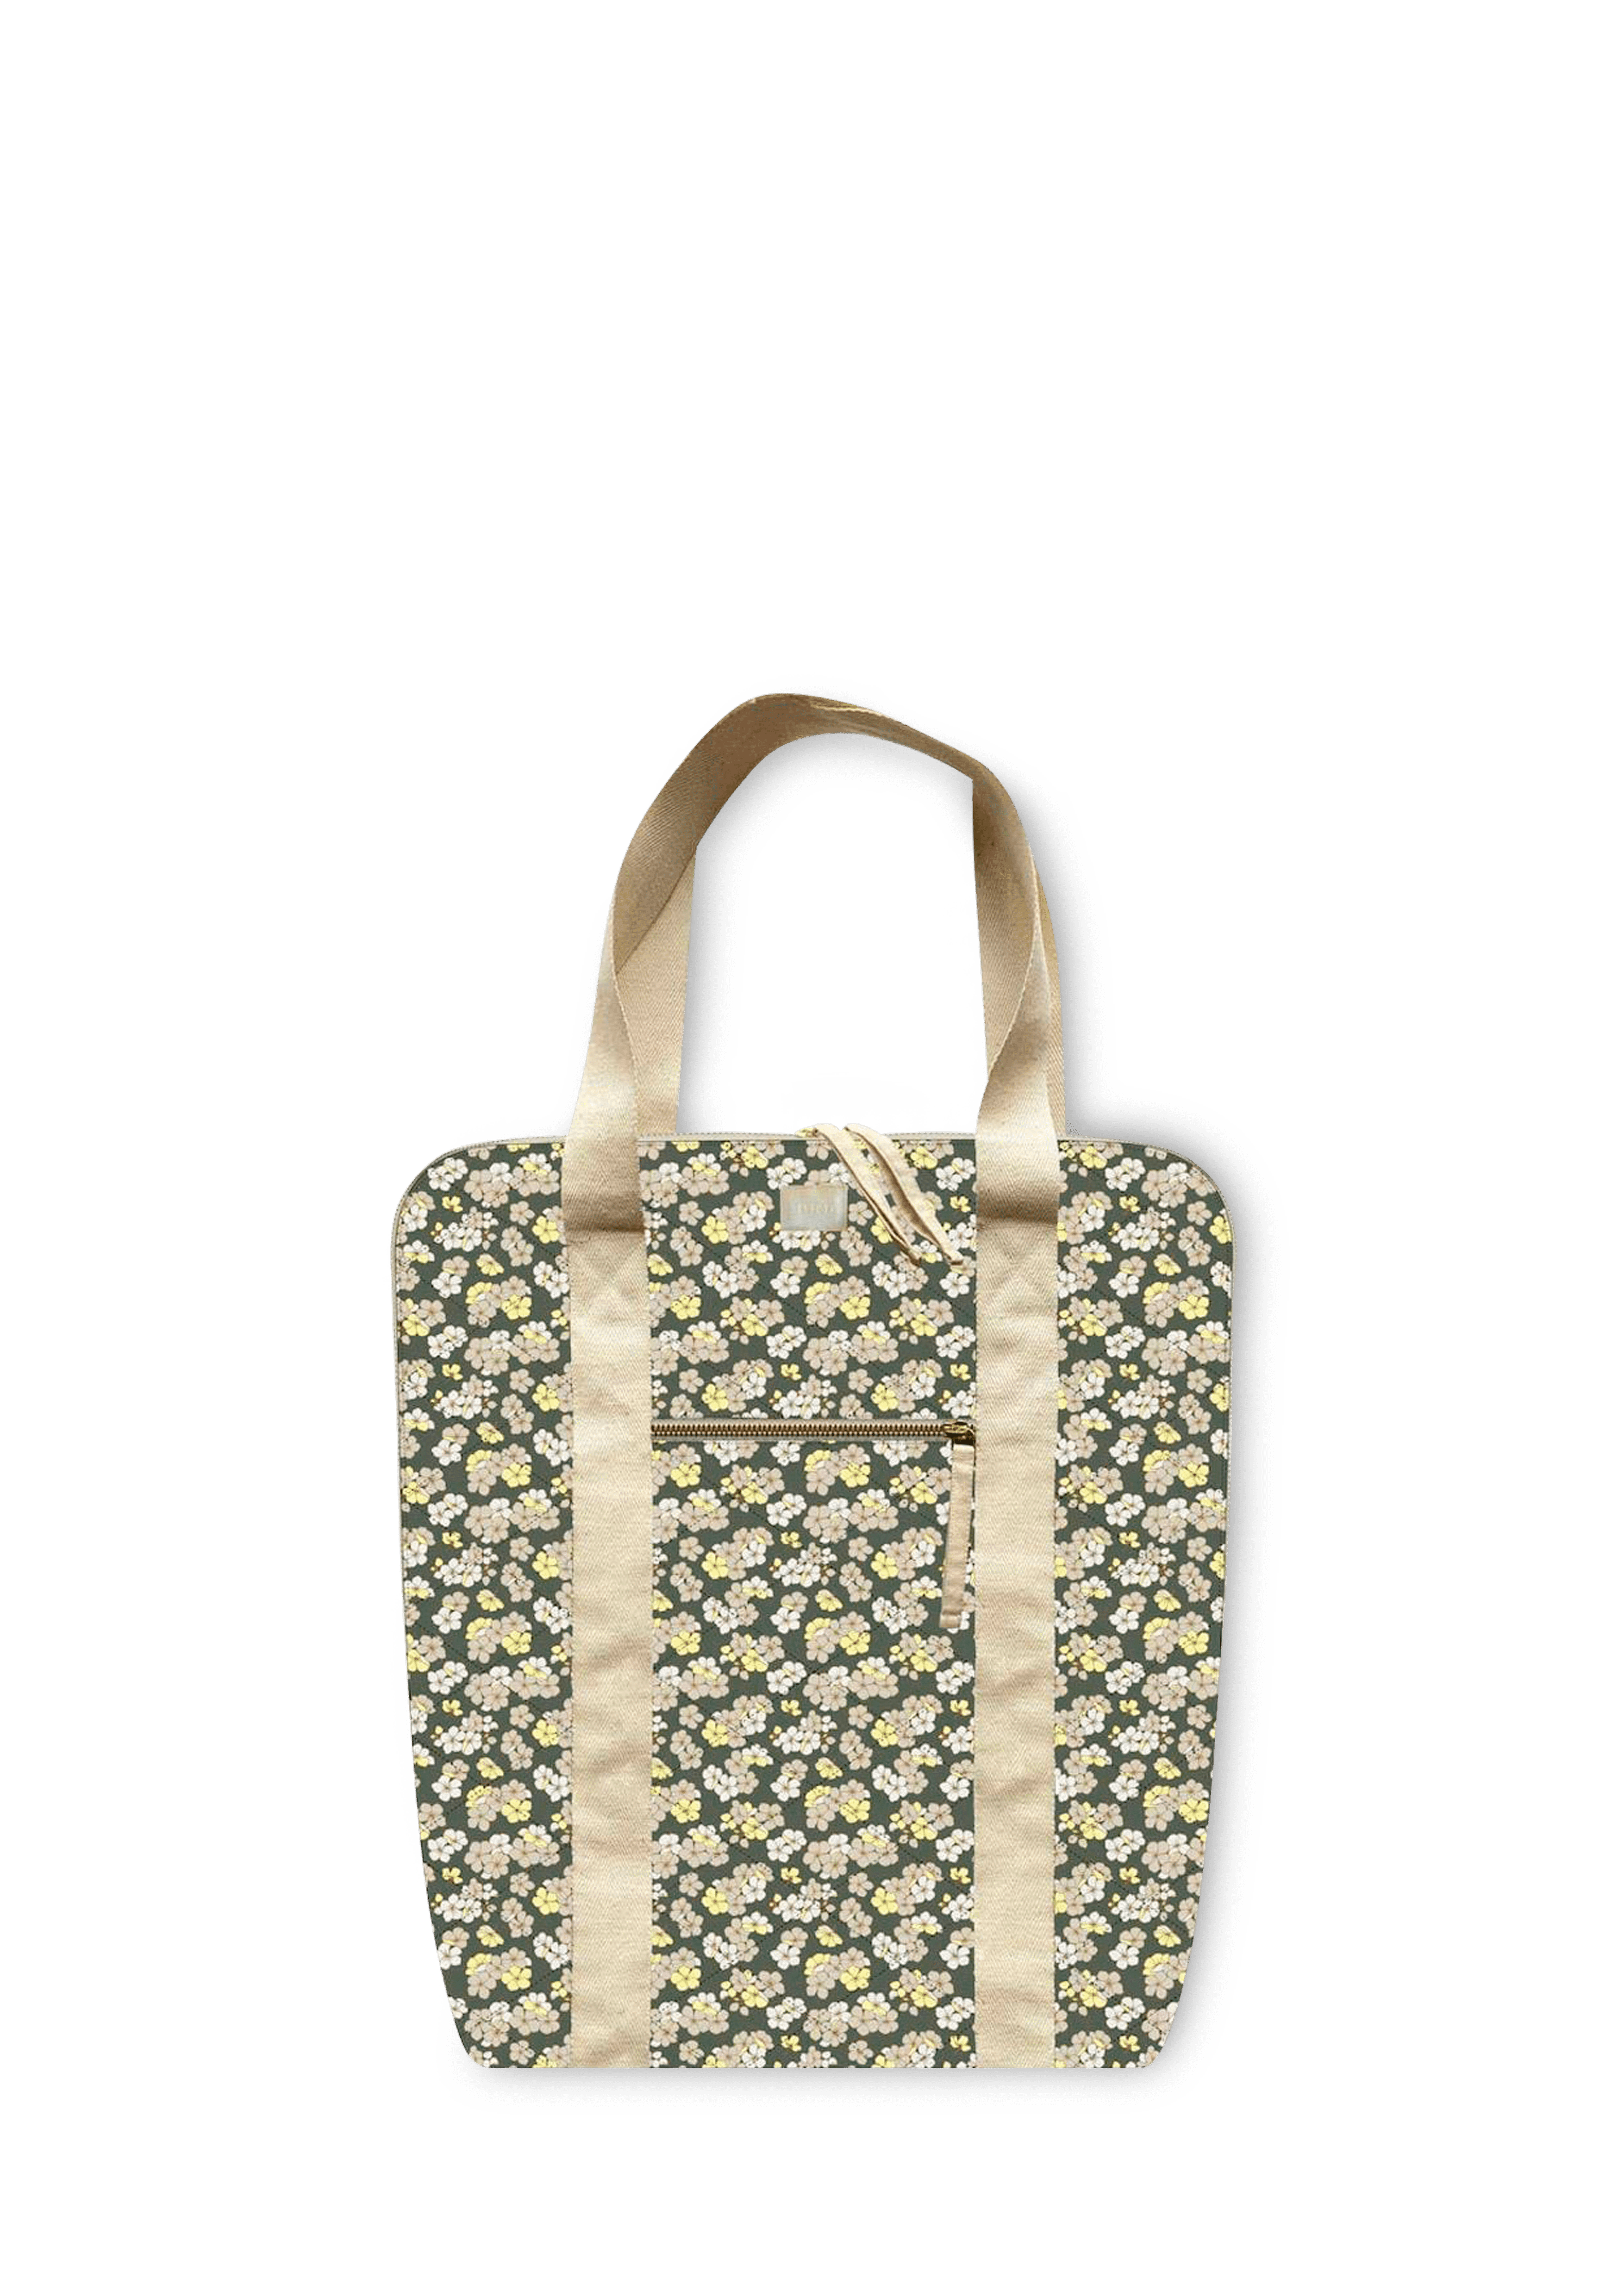 Andrea bag one size